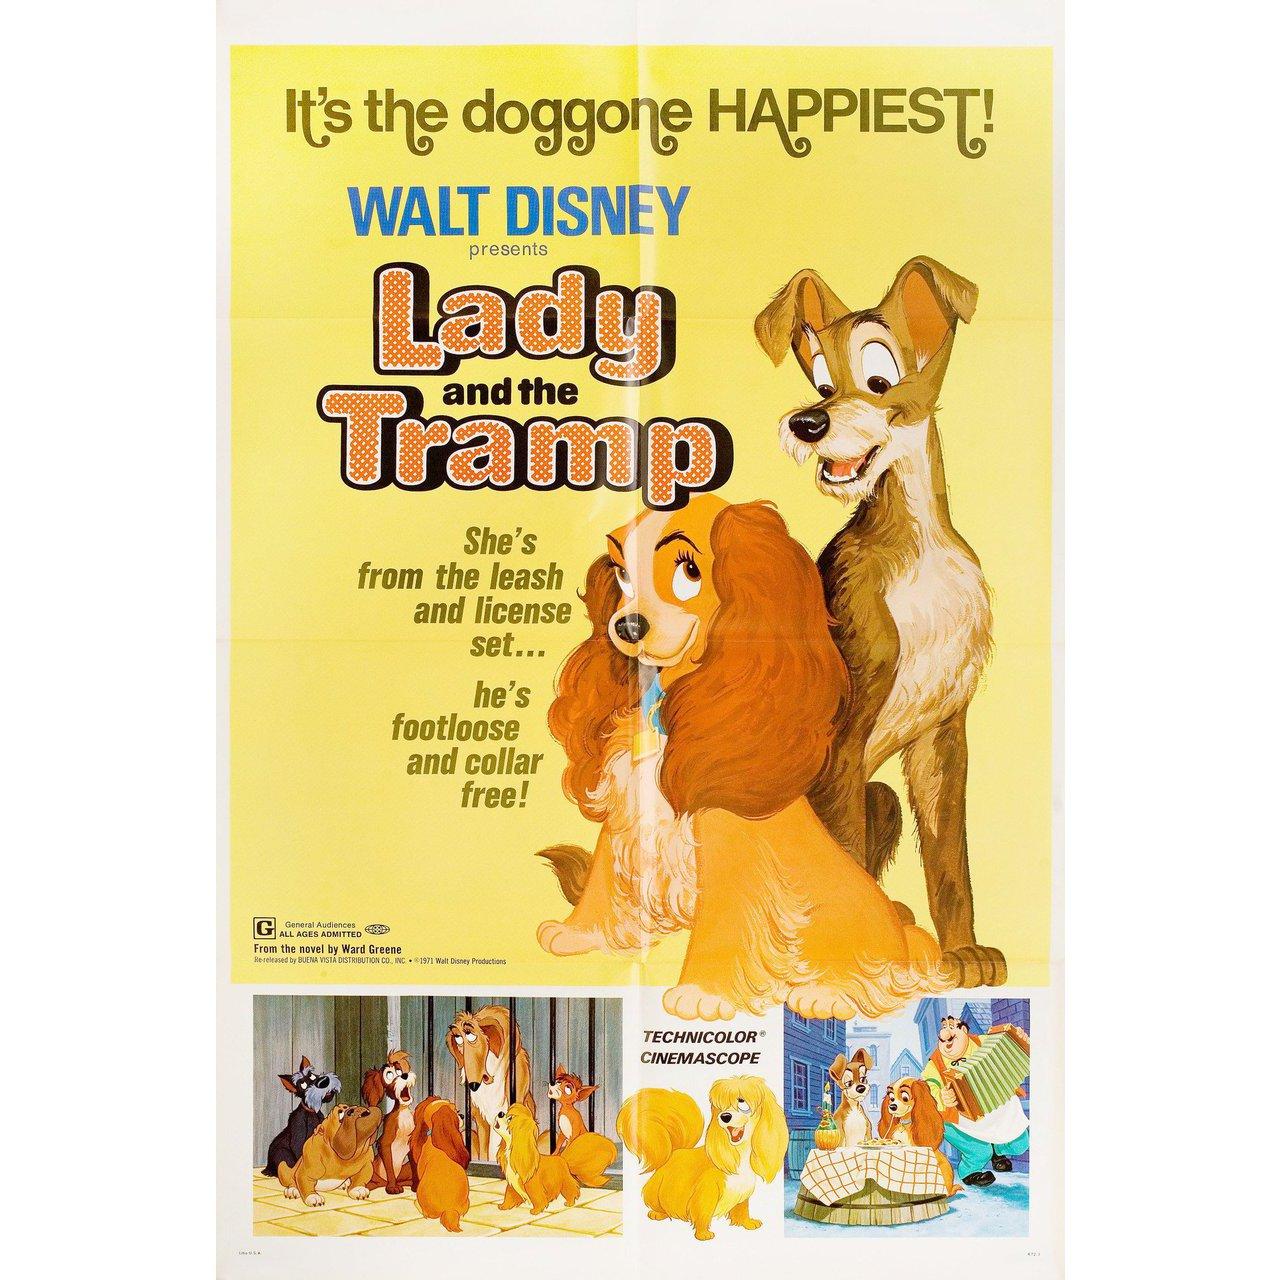 Original 1972 re-release U.S. one sheet poster for the 1955 film Lady and the Tramp directed by Clyde Geronimi / Wilfred Jackson / Hamilton Luske with Peggy Lee / Larry Roberts / Bill Baucom / Verna Felton. Fine condition, folded. Many original